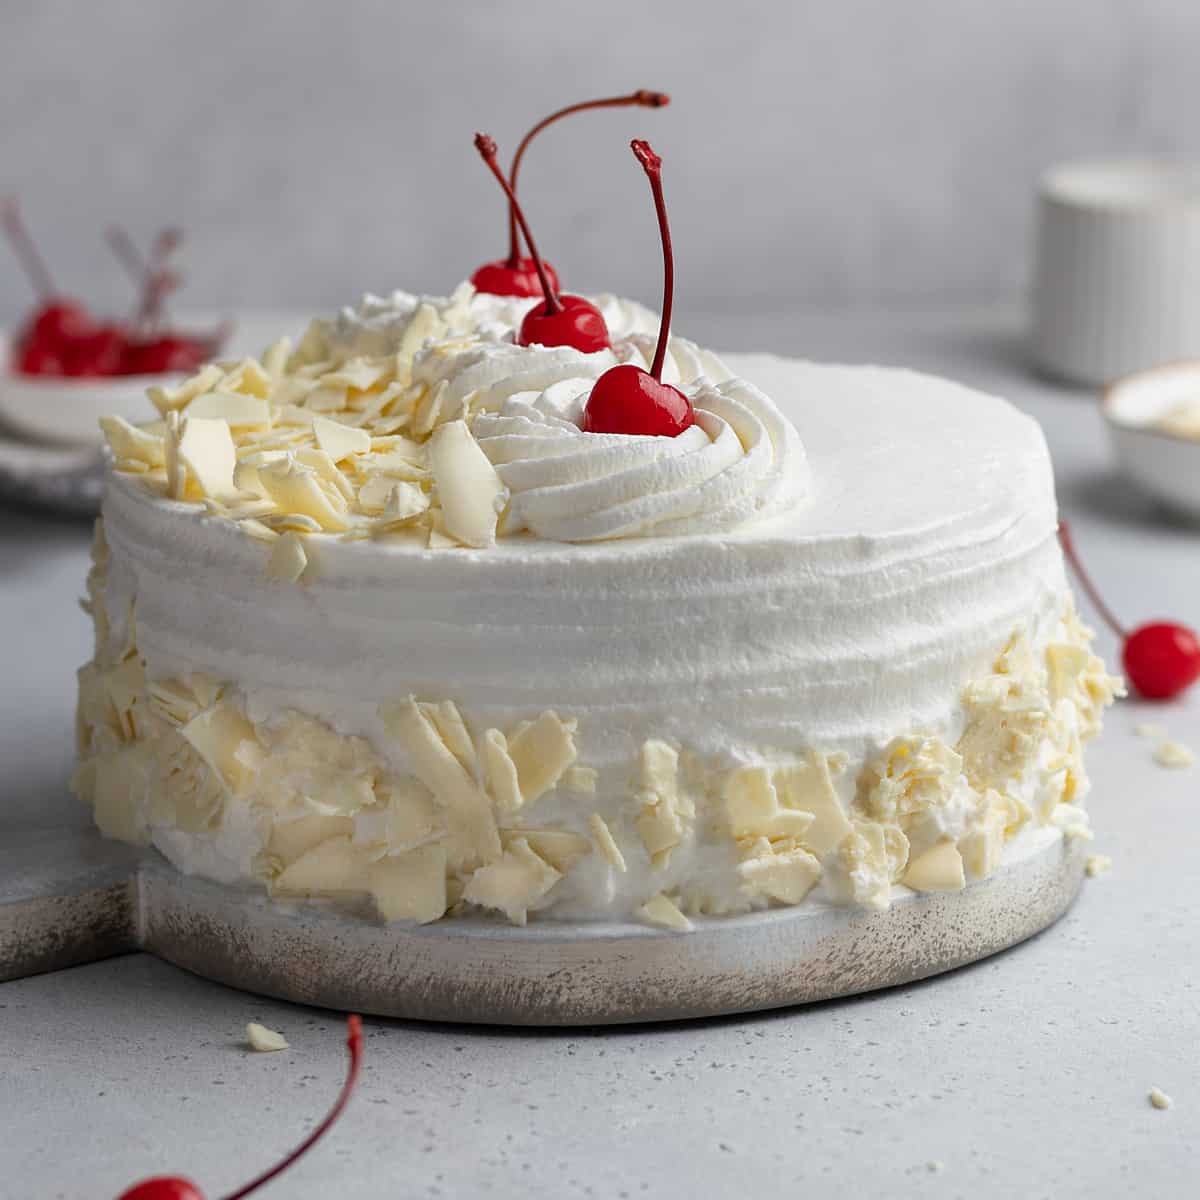 White Forest Flax Cake, 24x7 Home delivery of Cake in PADAPPAI, Chennai-thanhphatduhoc.com.vn